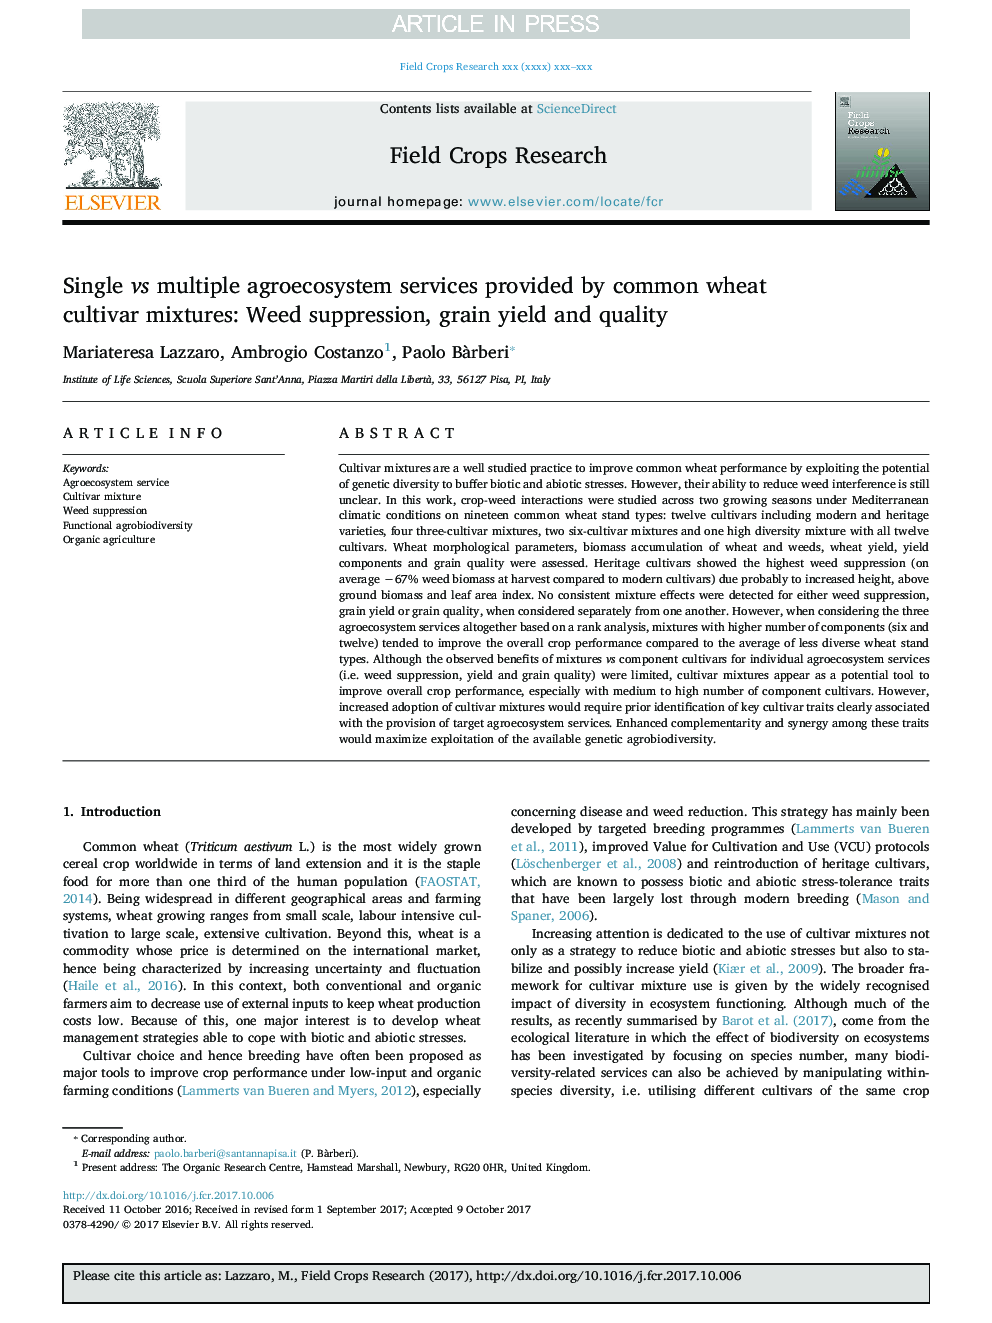 Single vs multiple agroecosystem services provided by common wheat cultivar mixtures: Weed suppression, grain yield and quality